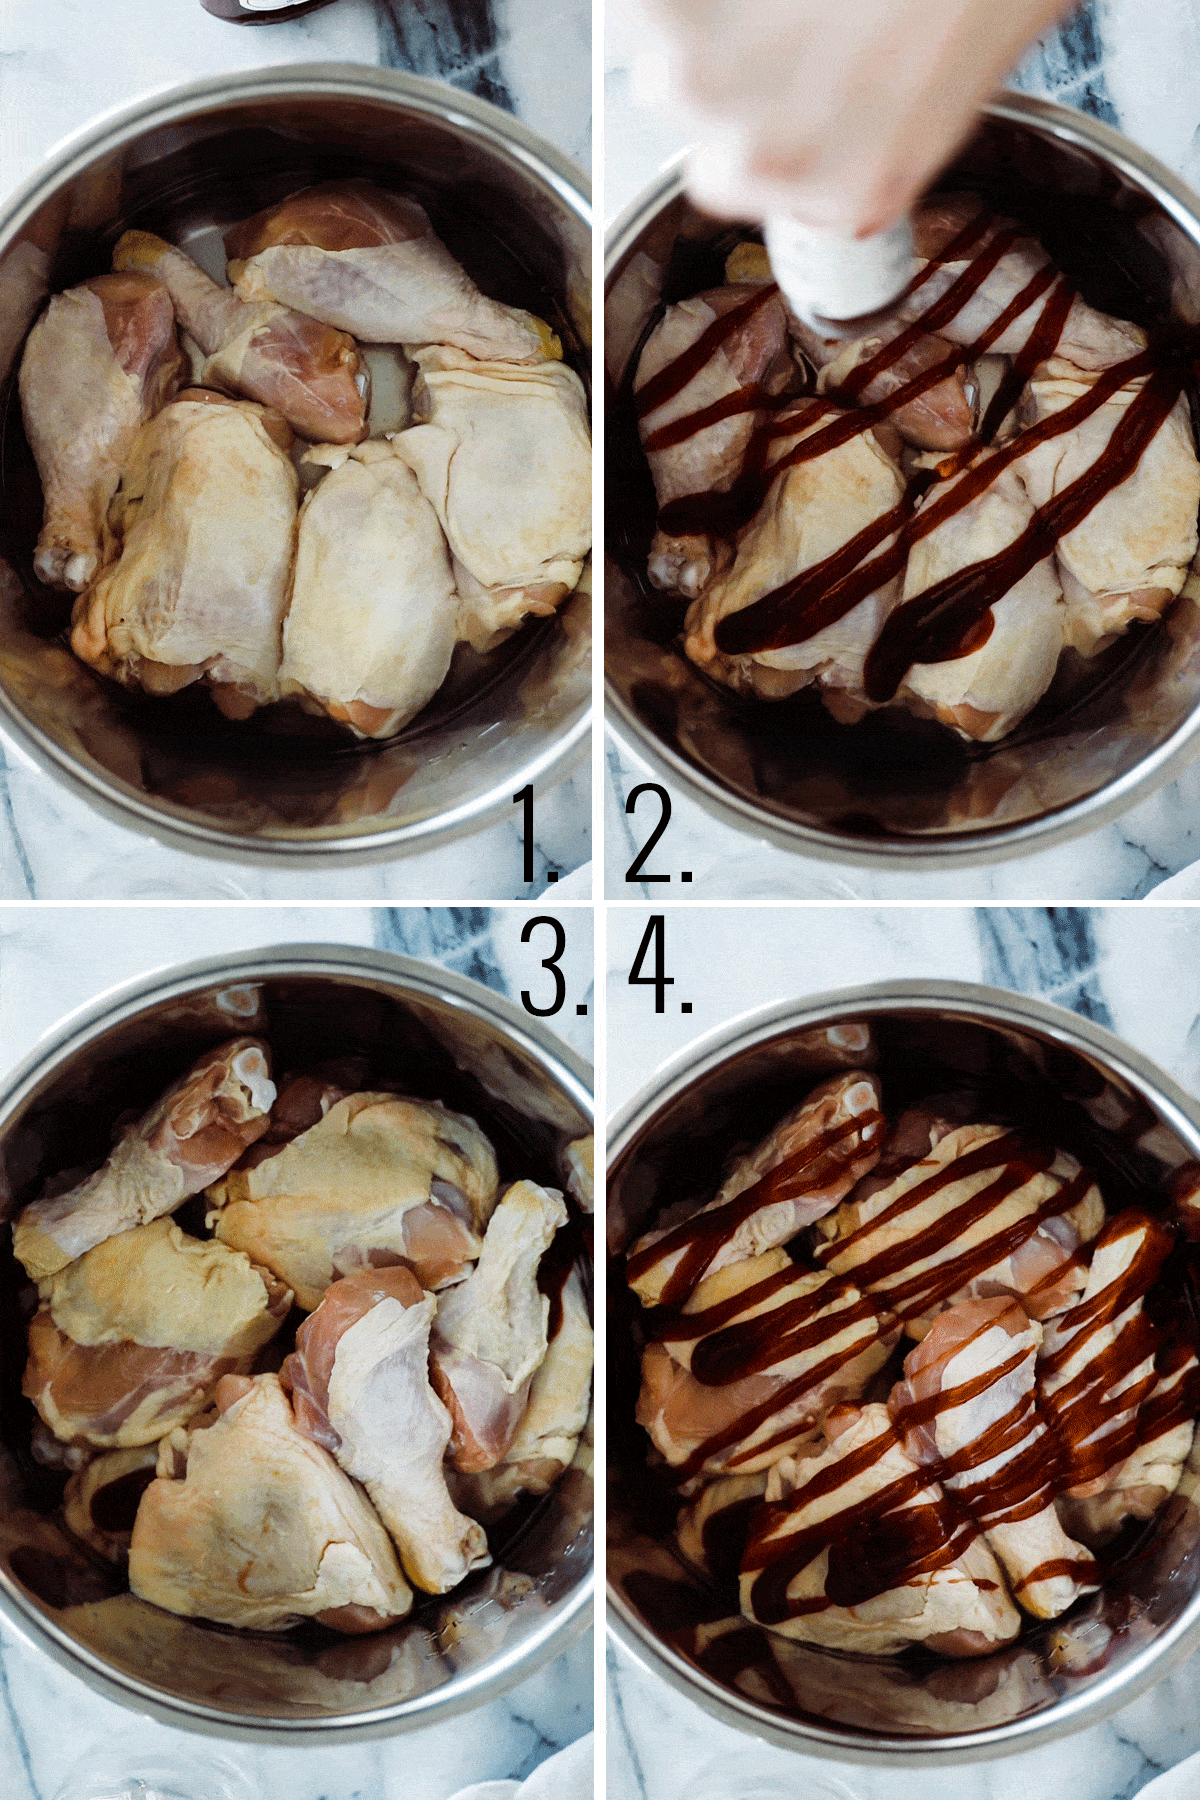 Raw chicken in instant pot with bbq sauce.